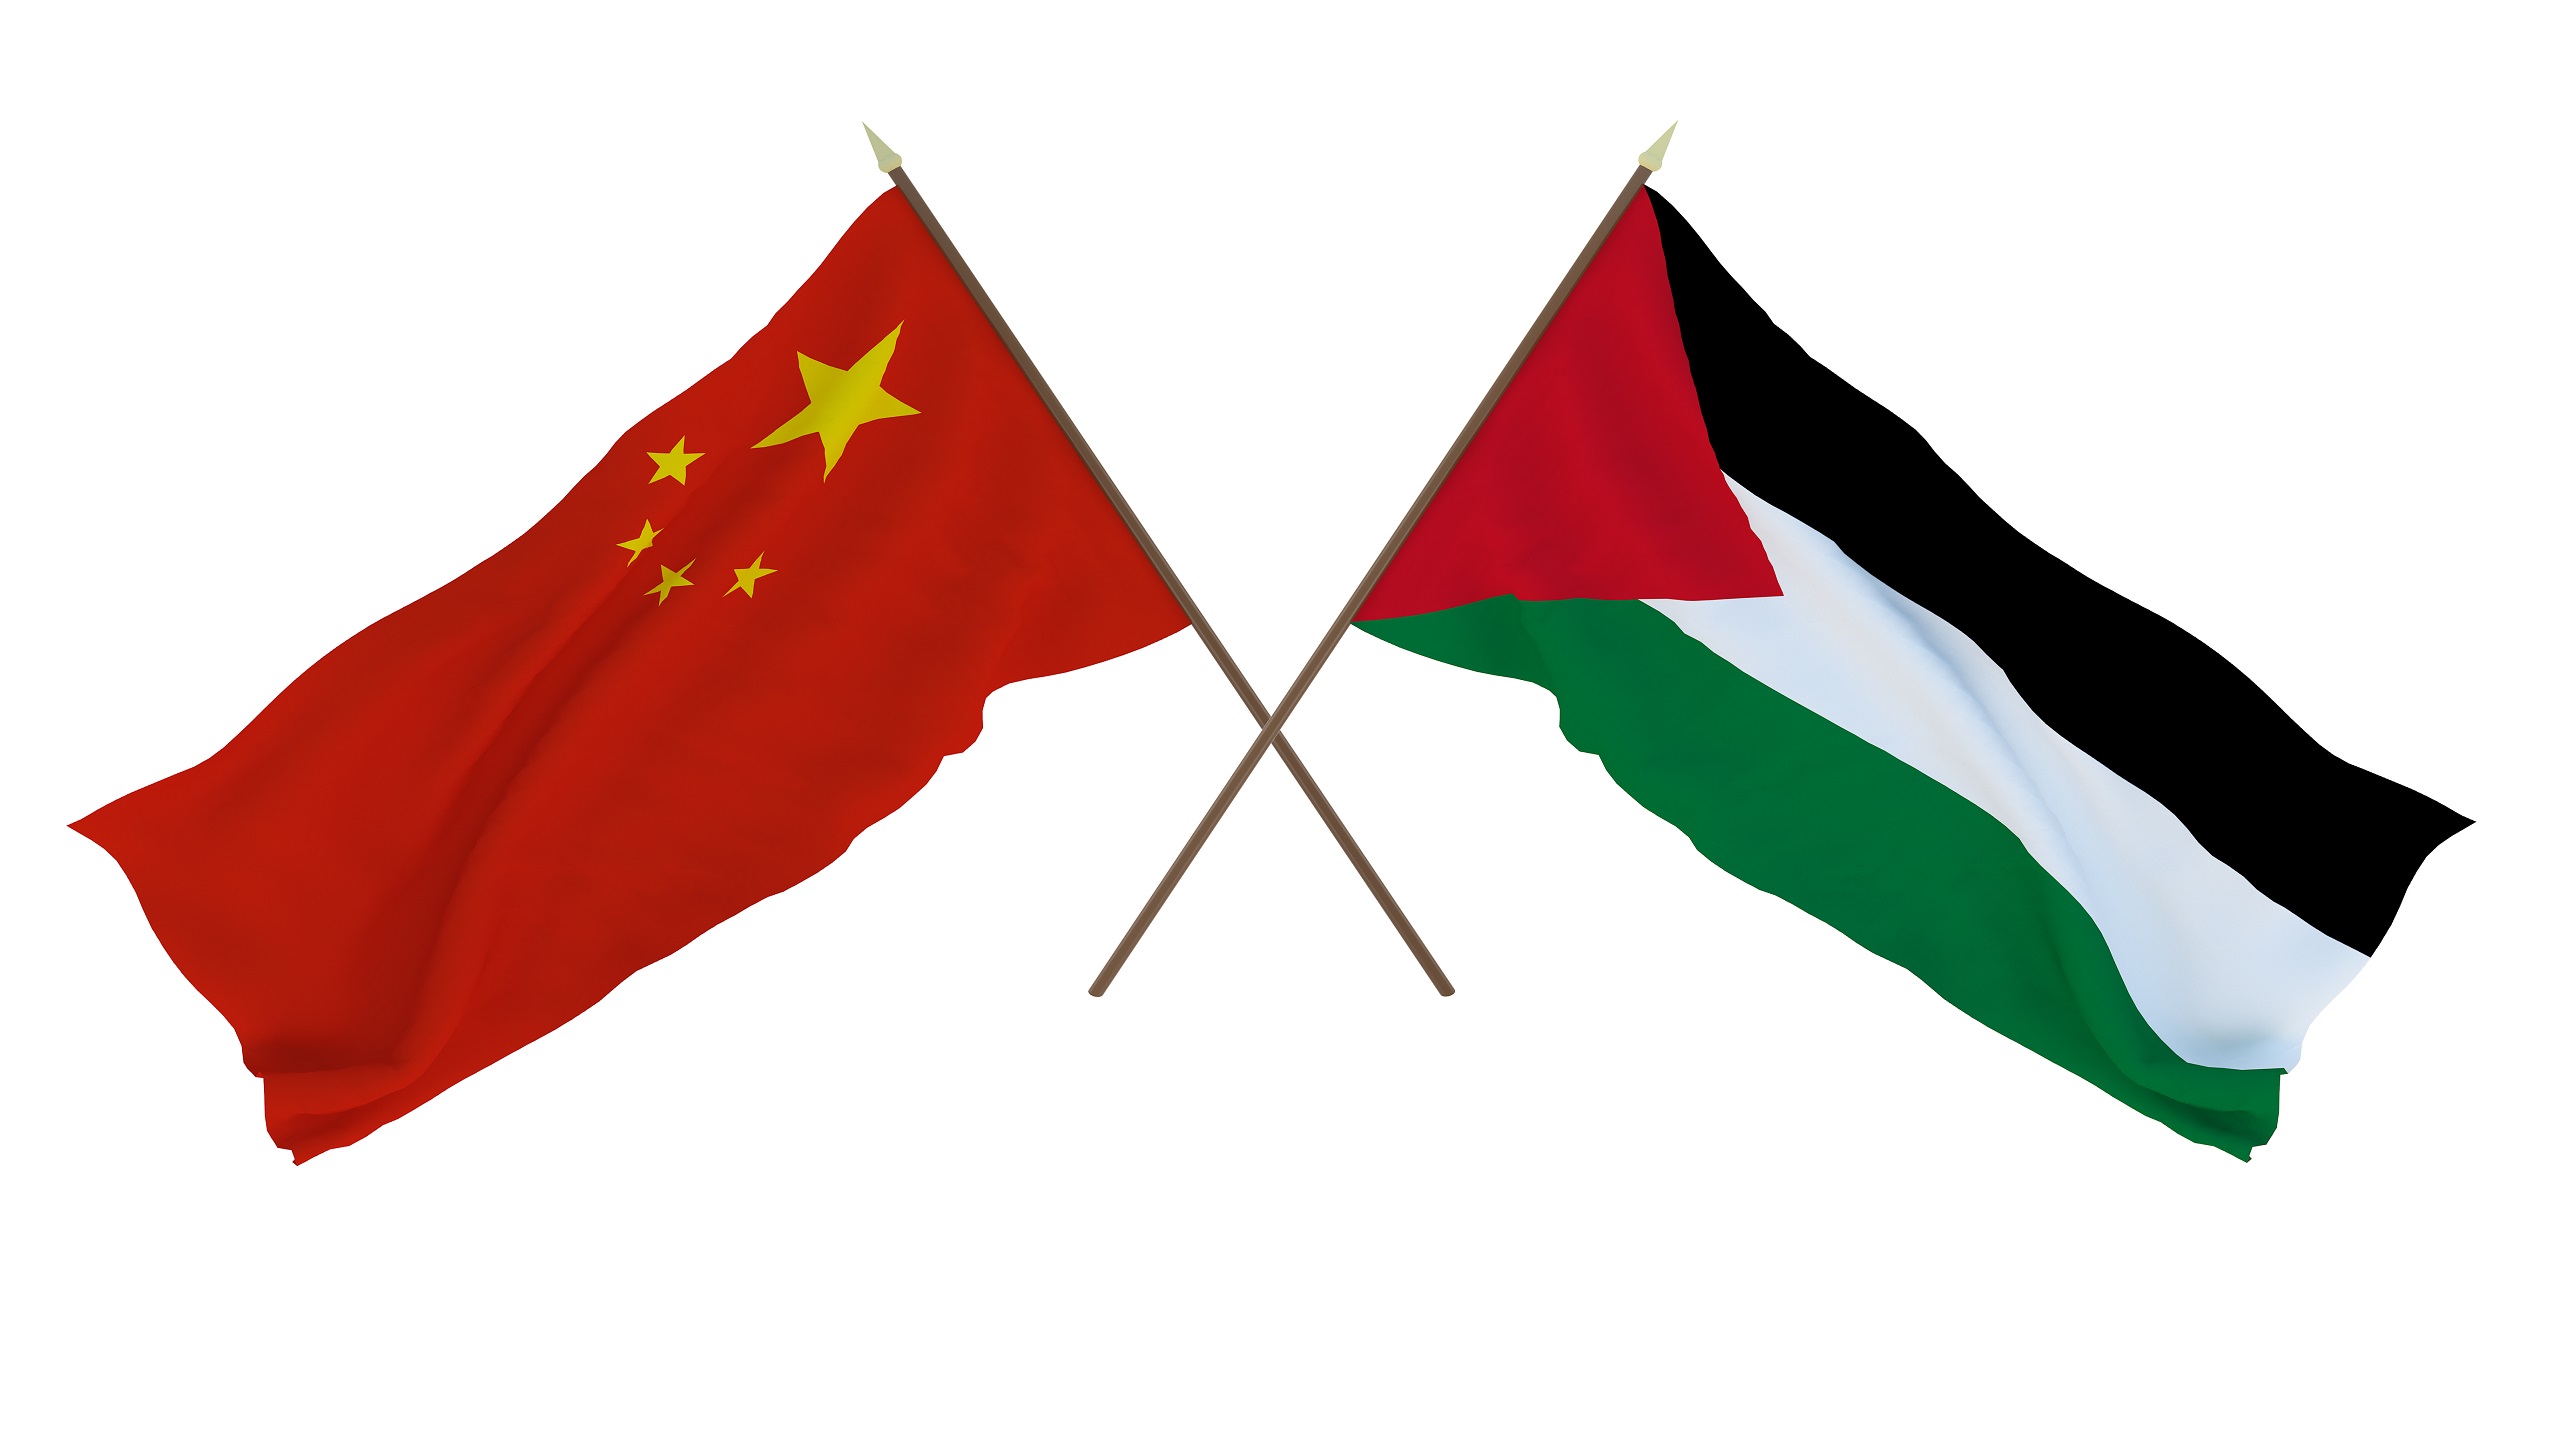 China, Palestinian Authority Sign Partnership Pact as China Expands Middle East Role